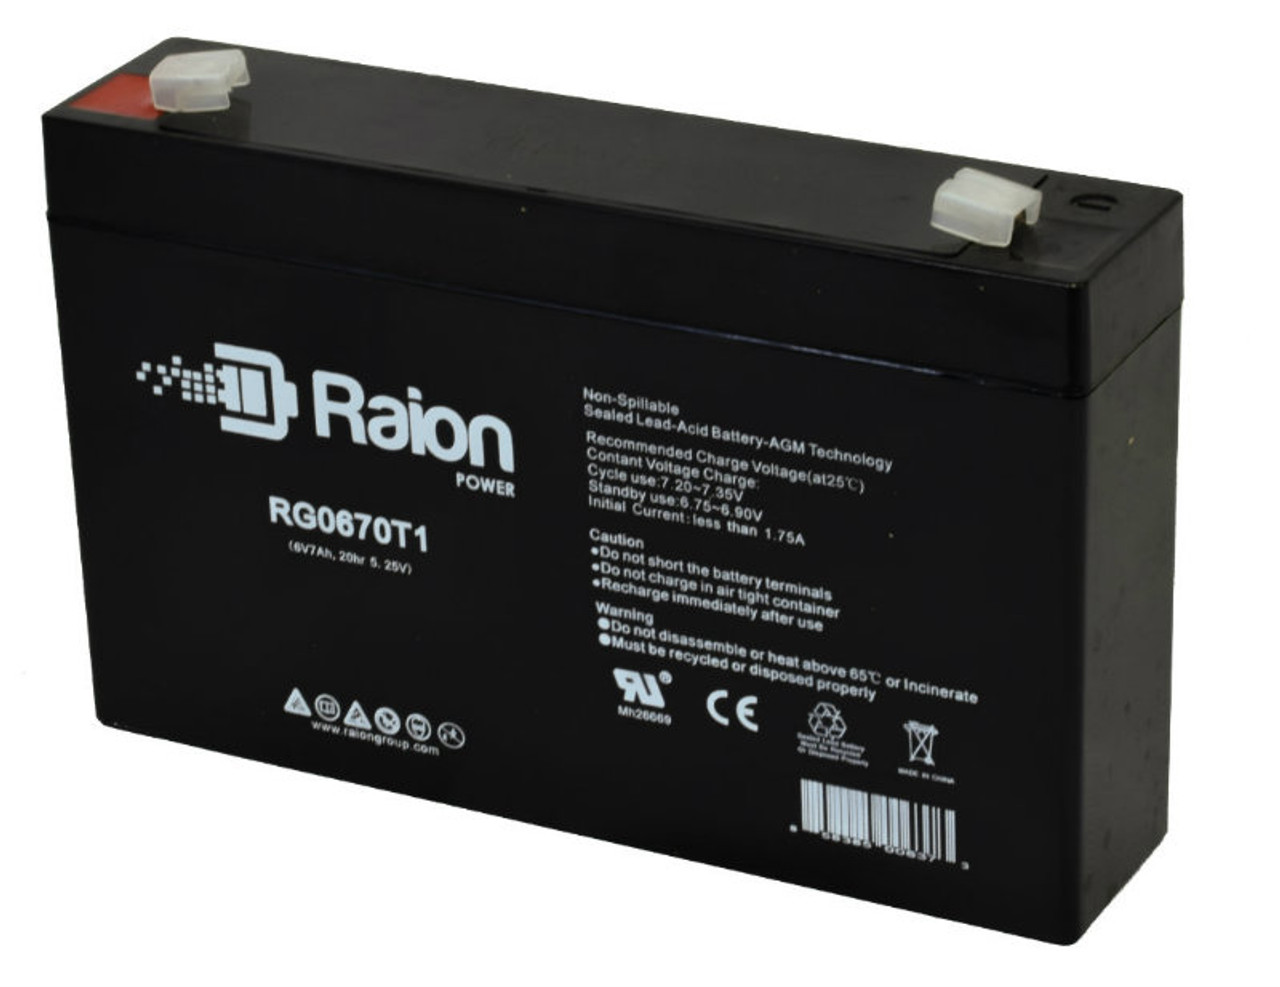 Raion Power RG0670T1 6V 7Ah Replacement Emergency Lighting Battery for Dual Lite 0120824